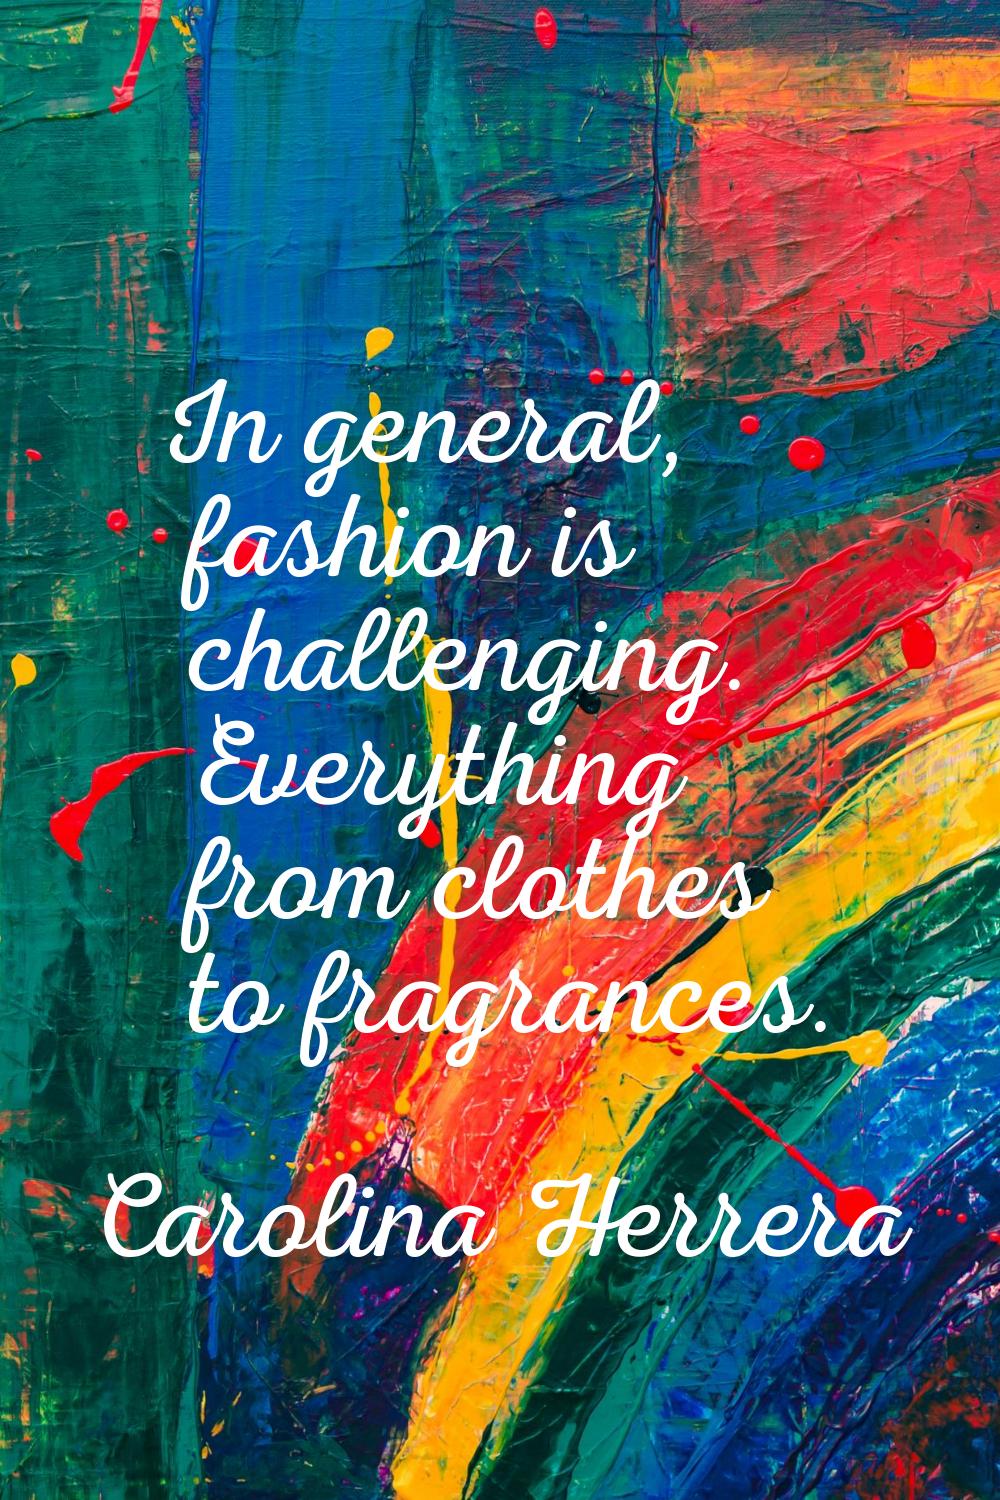 In general, fashion is challenging. Everything from clothes to fragrances.